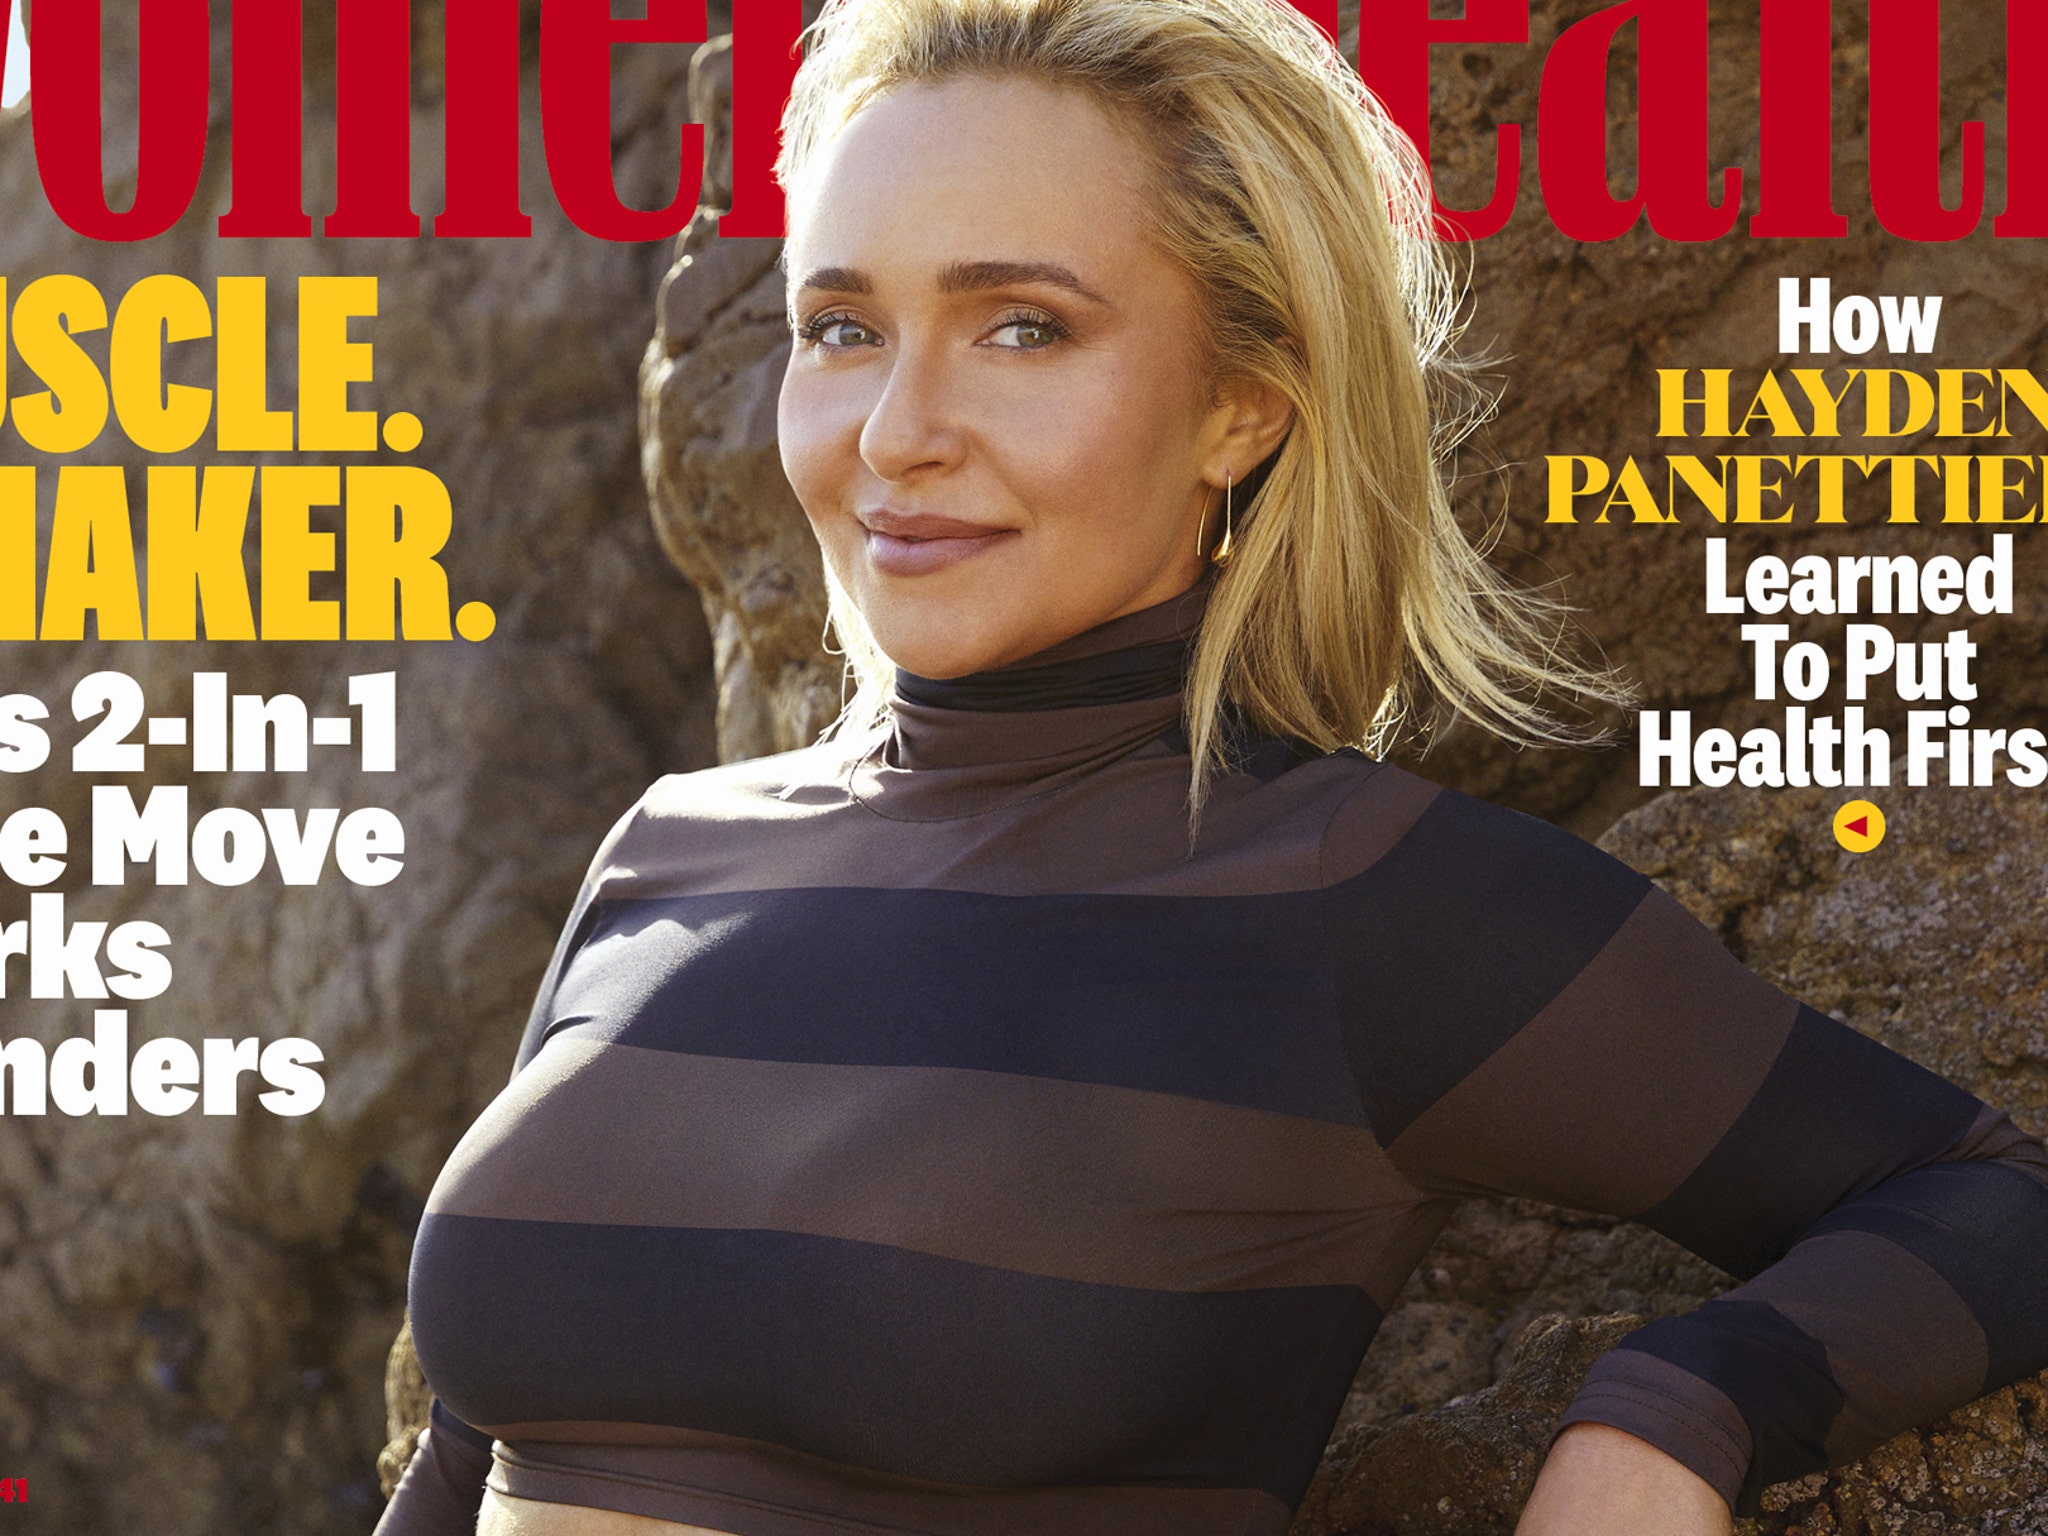 anand borse recommends Hayden Panettiere Tits